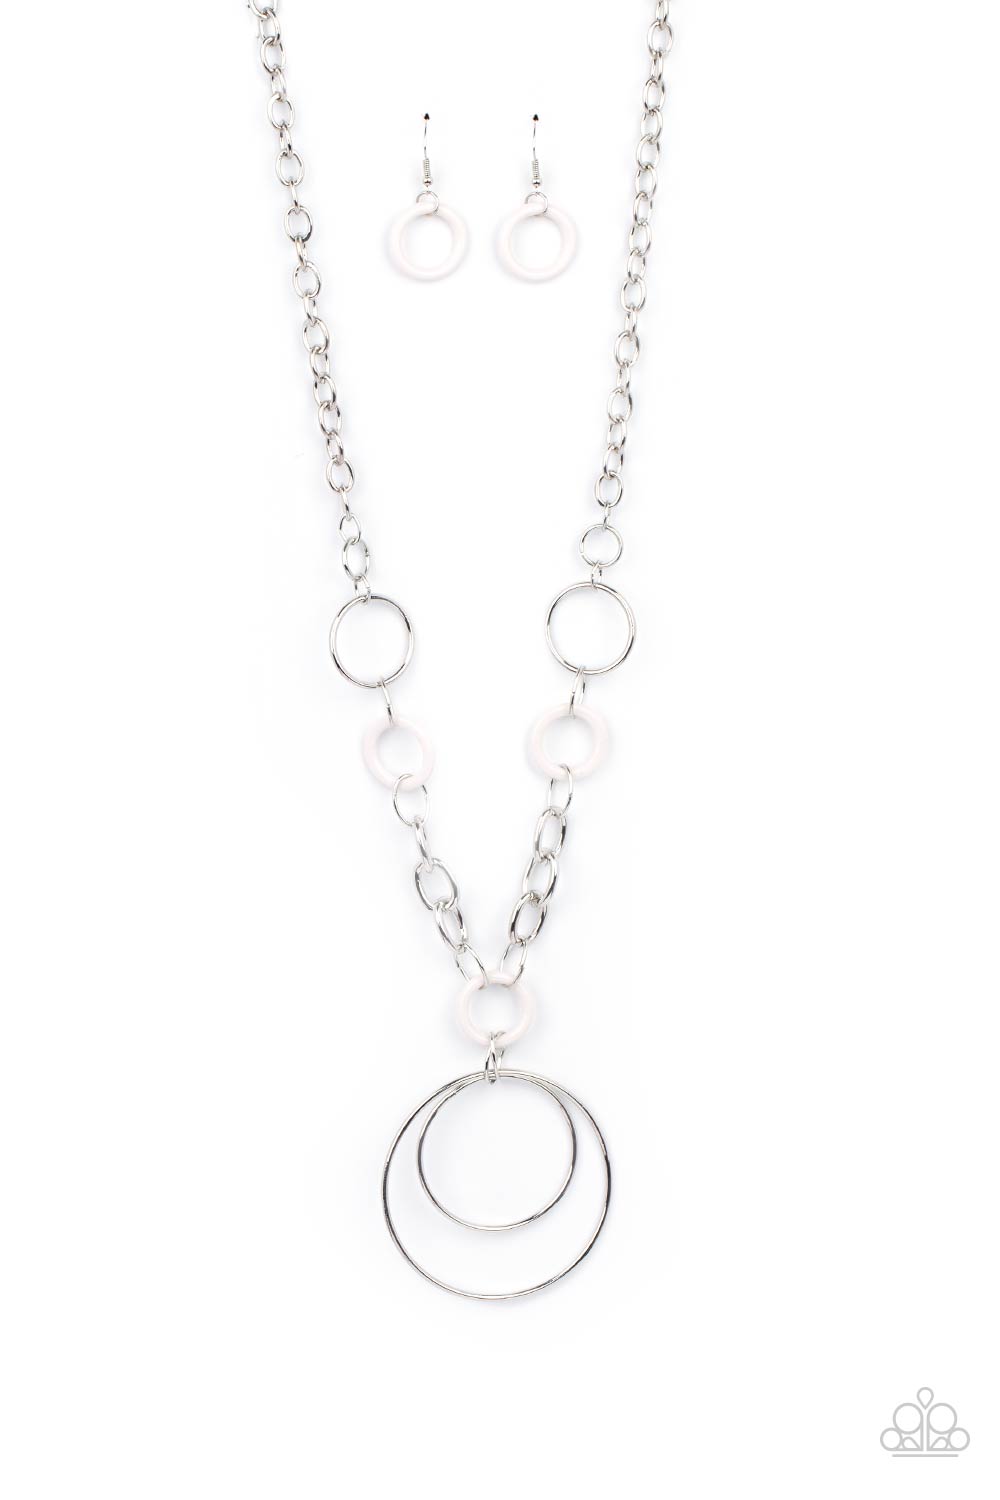 Paparazzi HOOP du Jour - White Necklace - A Finishing Touch Jewelry